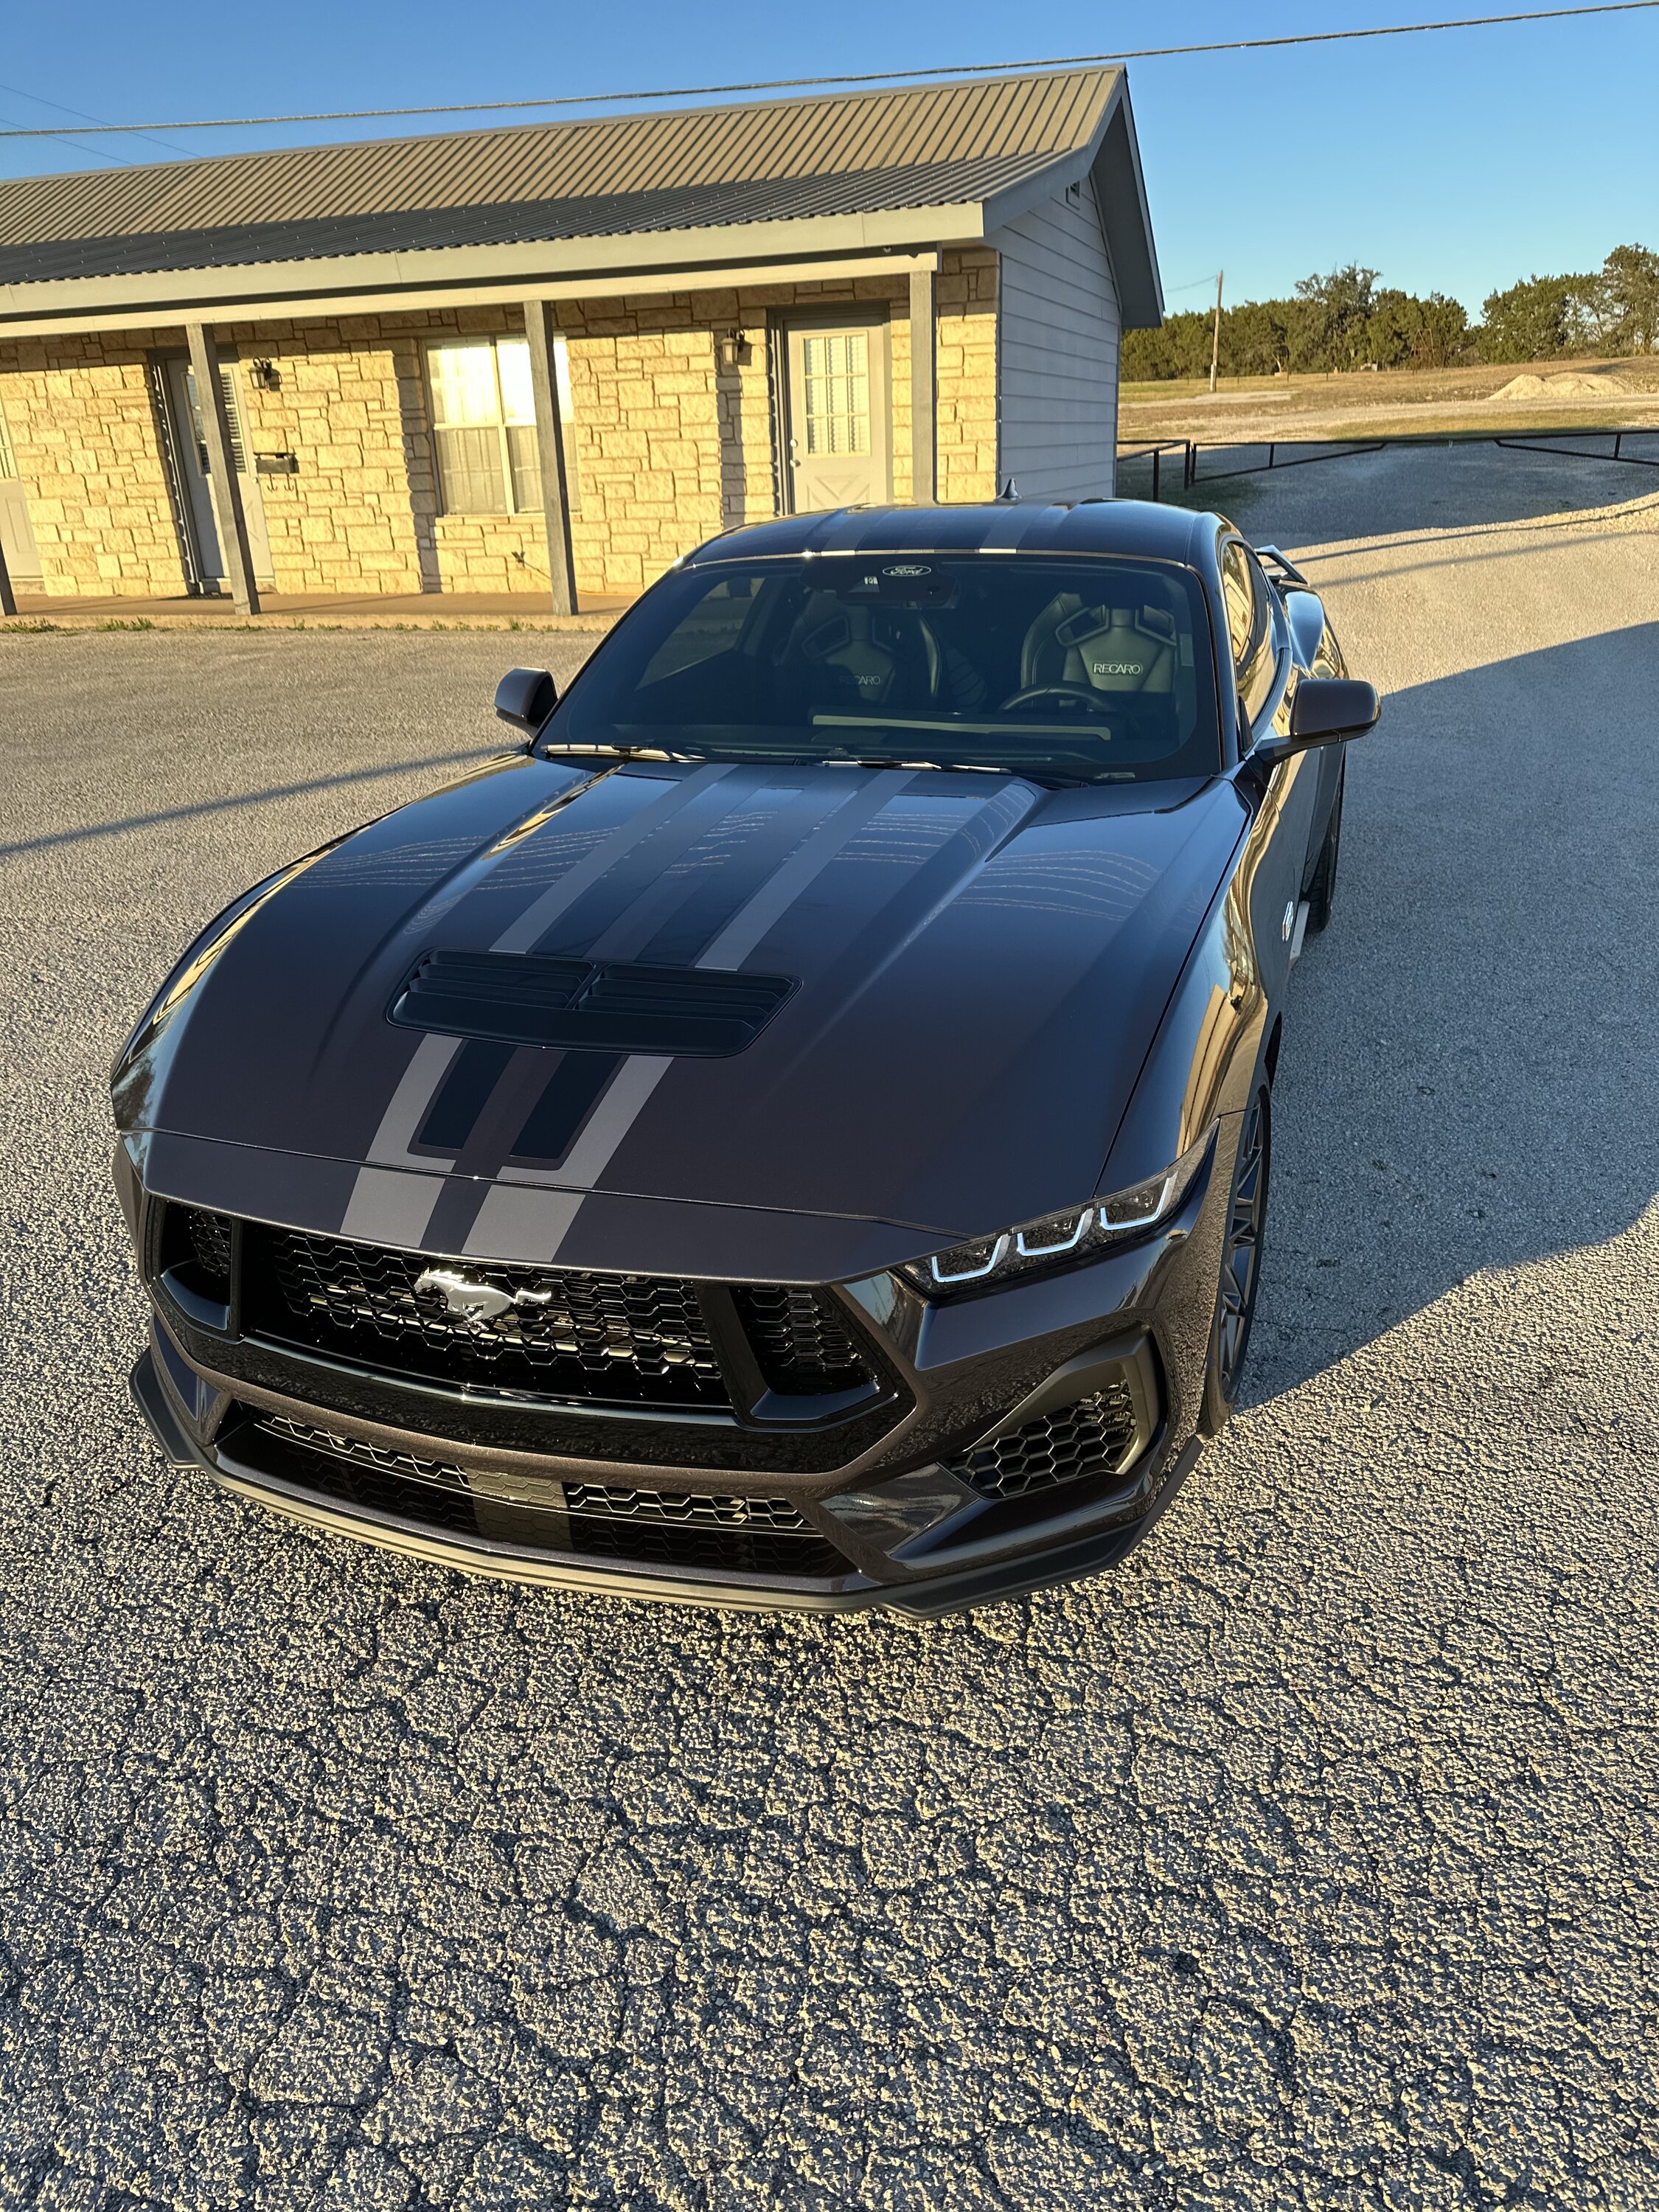 S650 Mustang Photo request: Dark Matter Gray with black stripes? IMG_4654